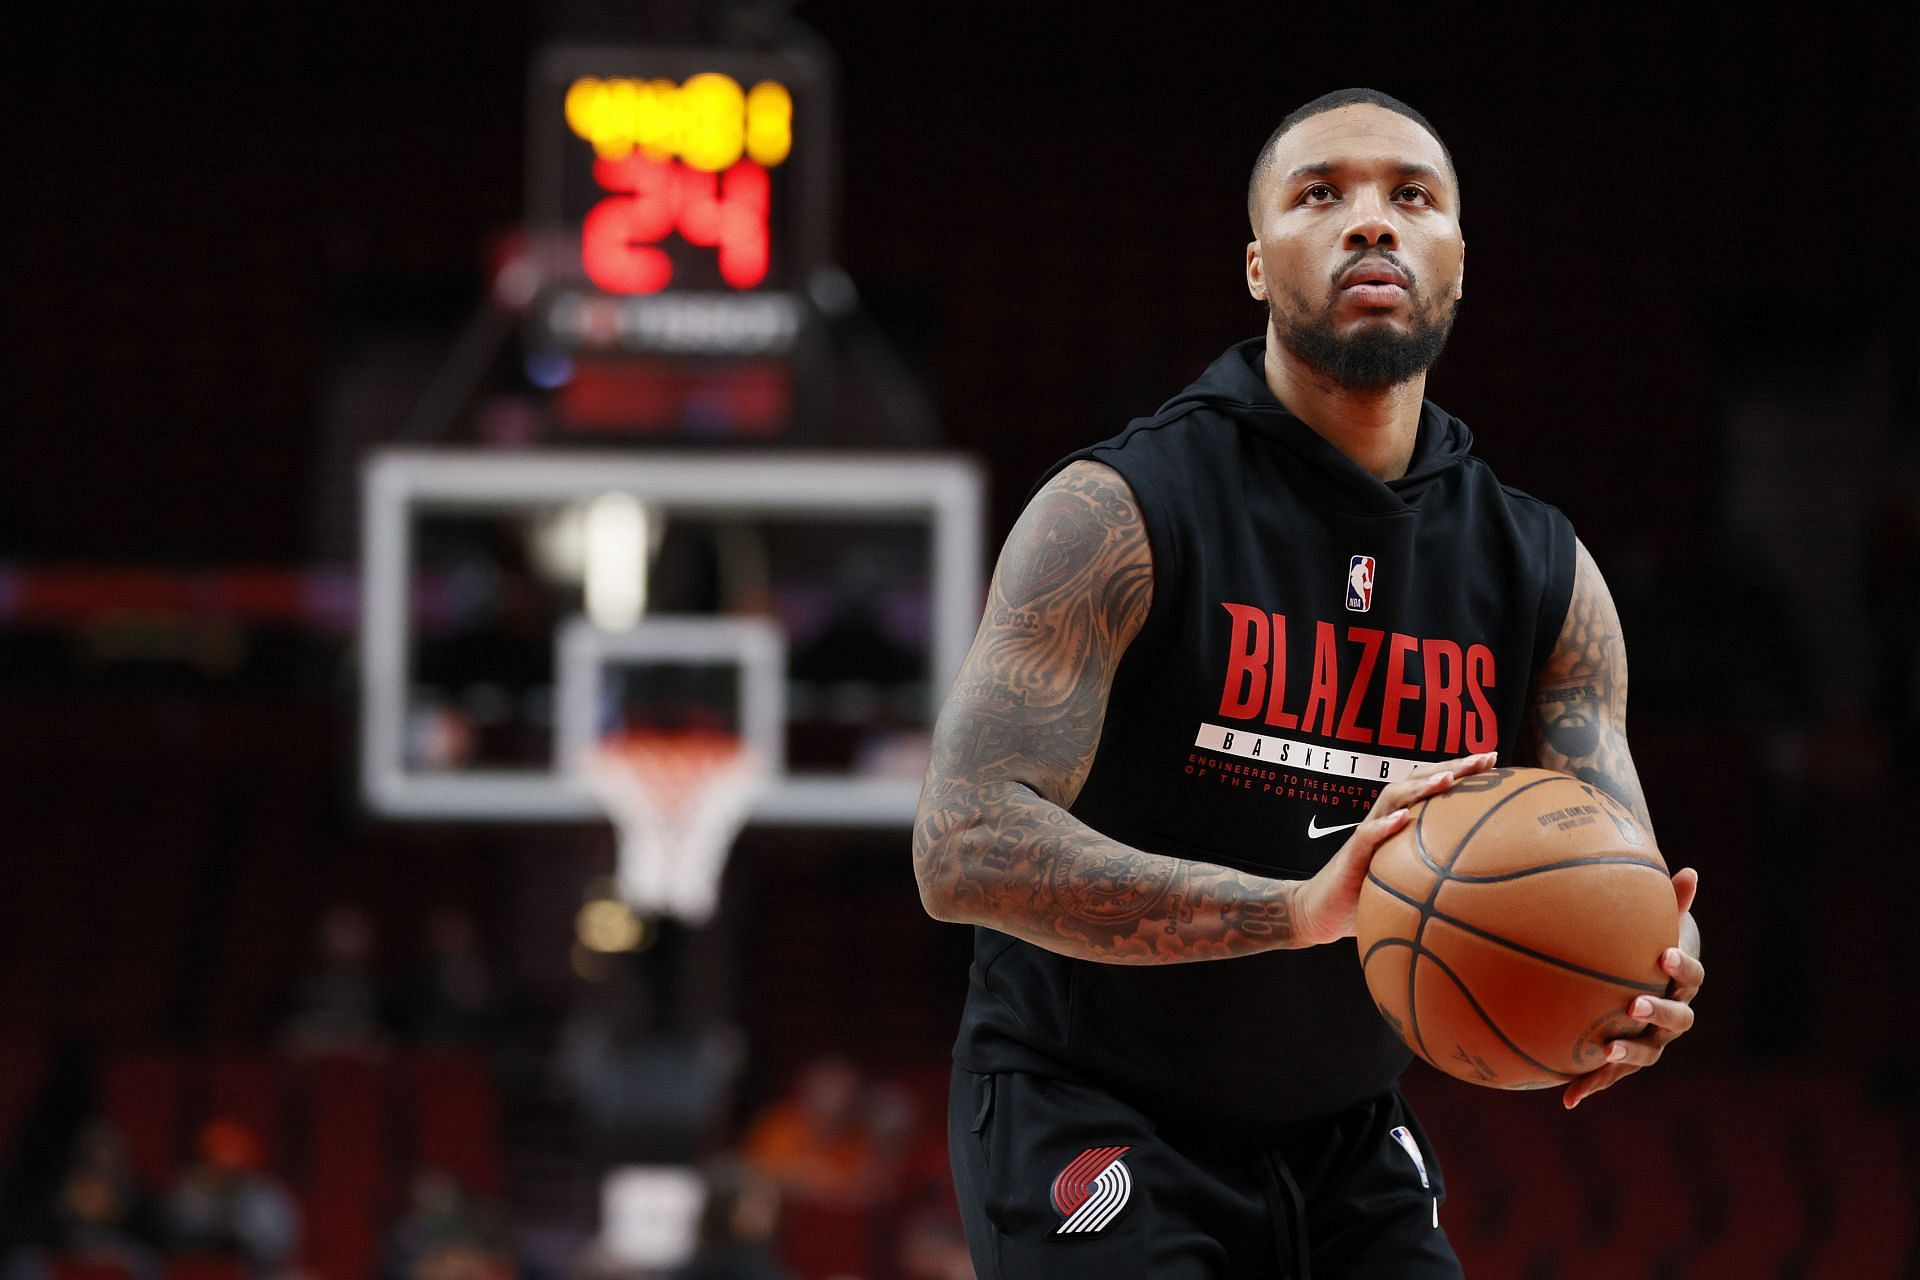 Damian Lillard #0 of the Portland Trail Blazers warms up before the game against the Orlando Magic at Moda Center on February 08, 2022 in Portland, Oregon